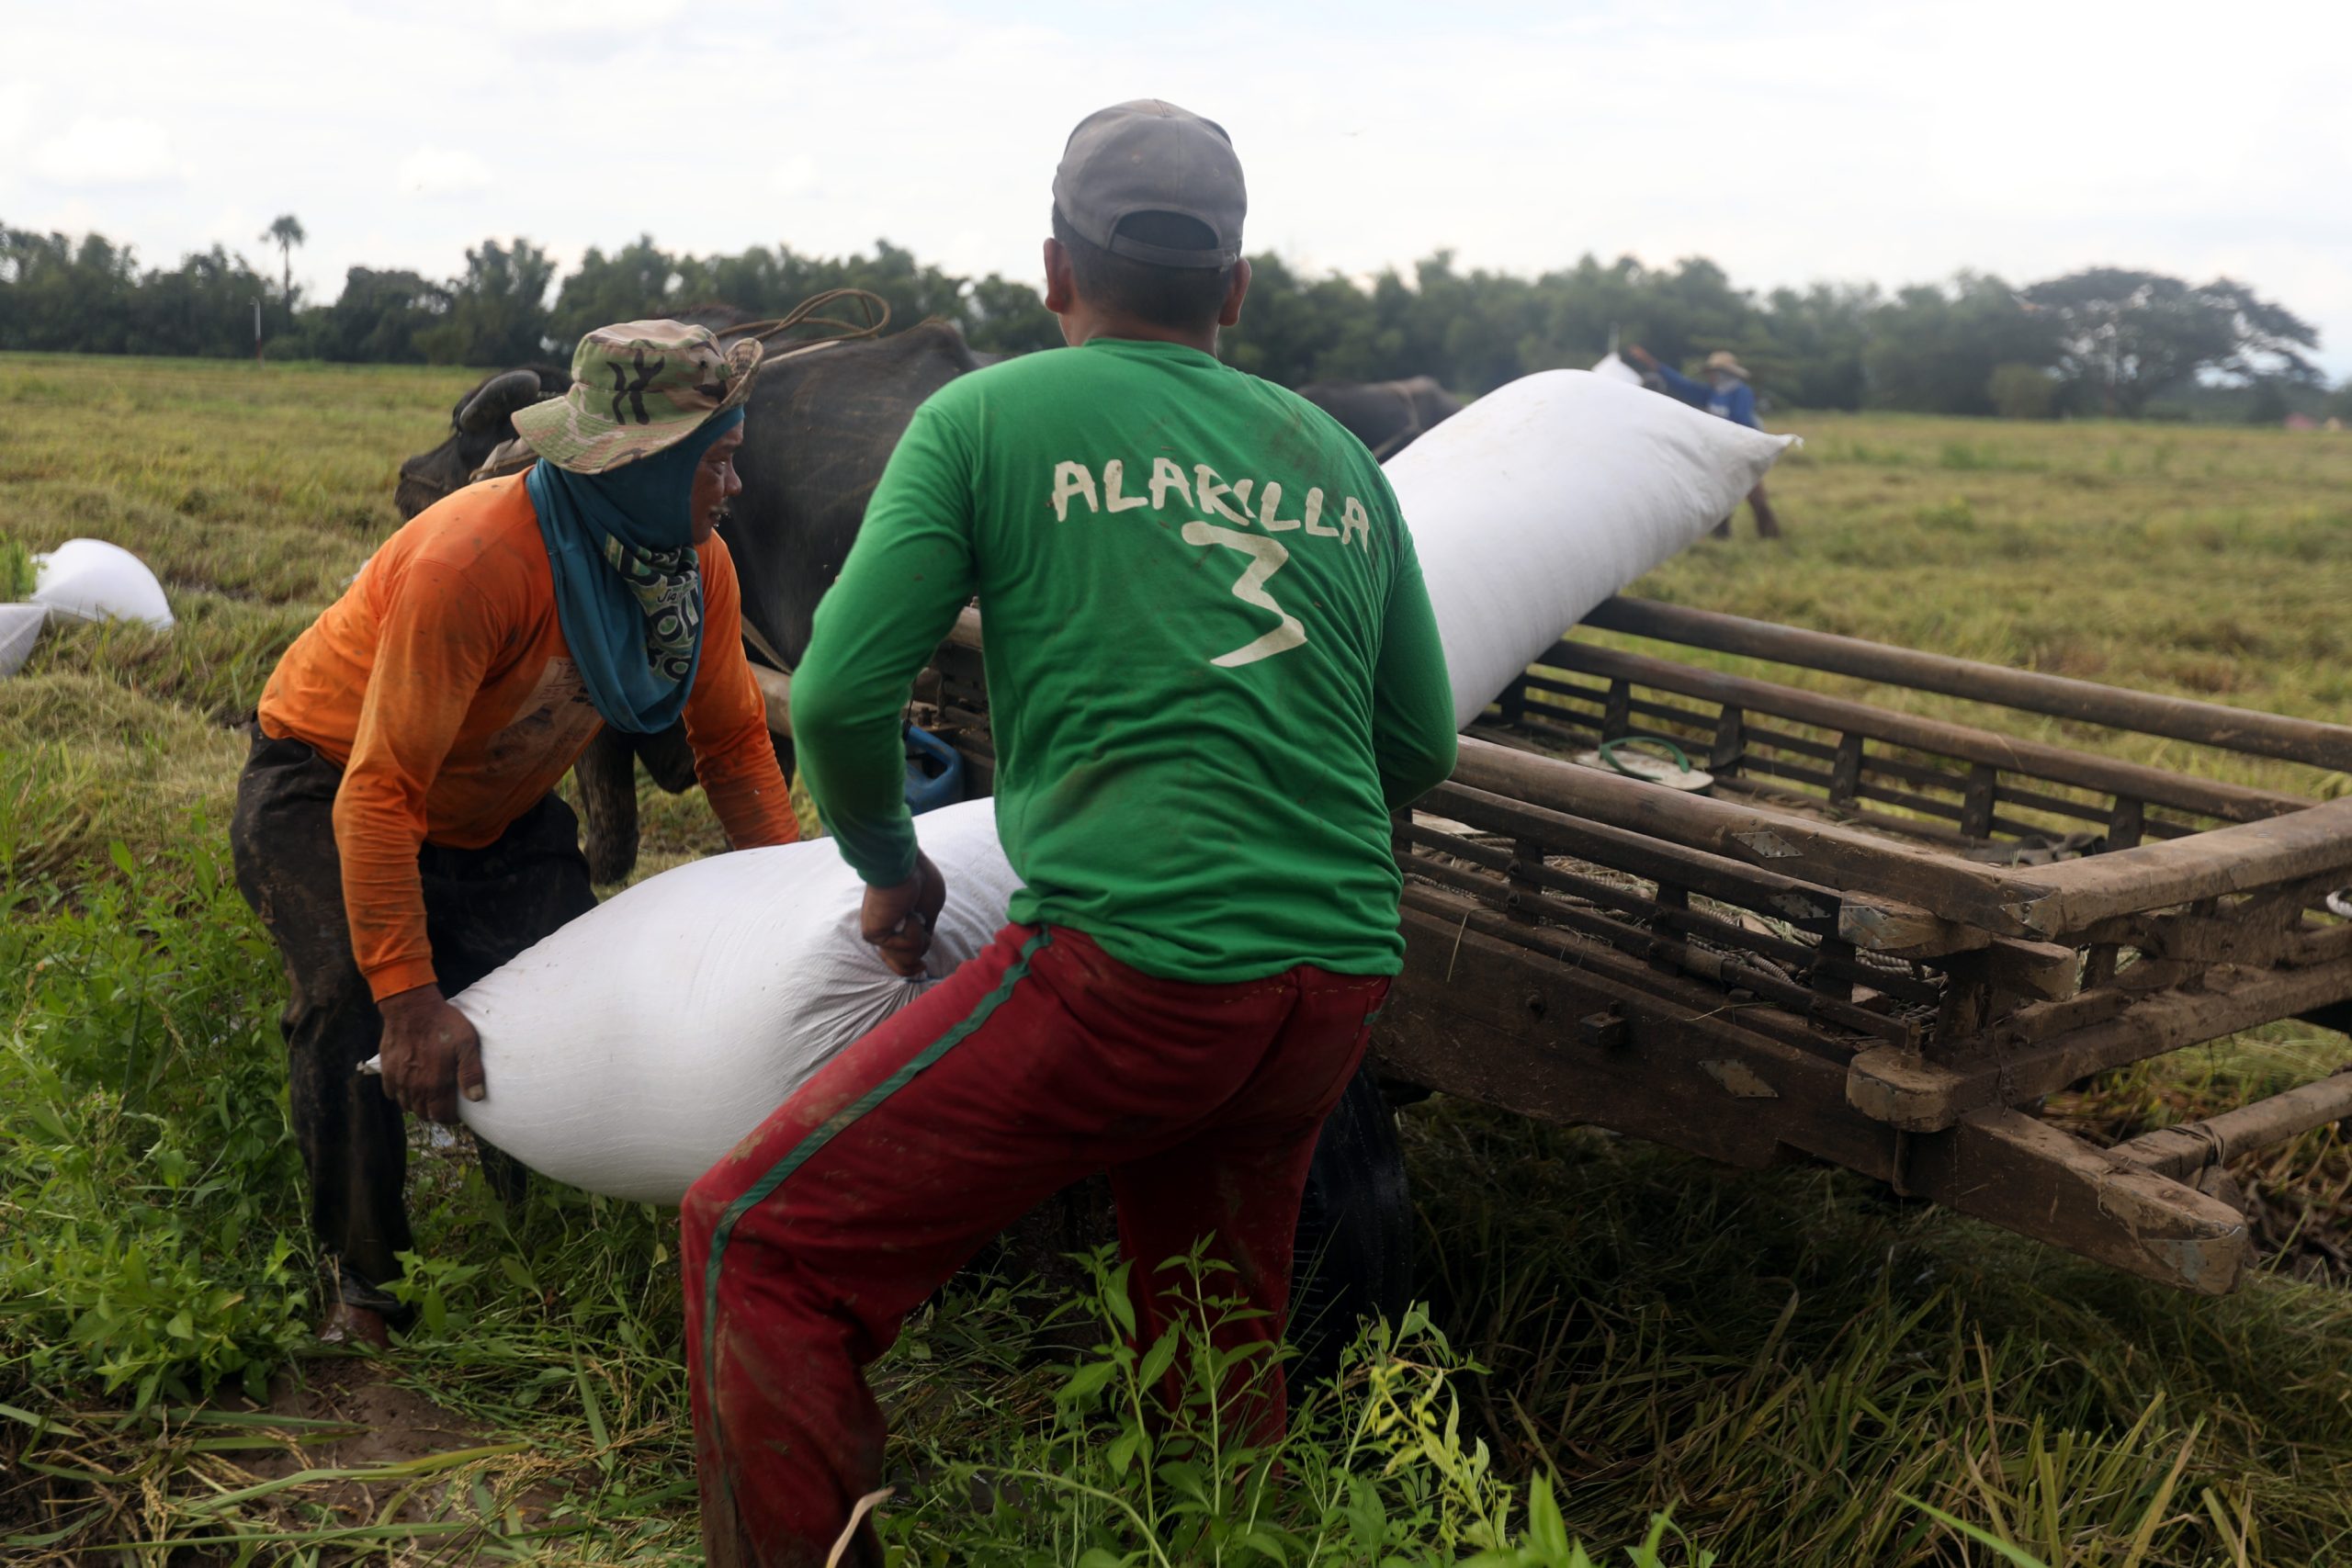 Farmers load a sack of newly harvested palay into a wooden cart